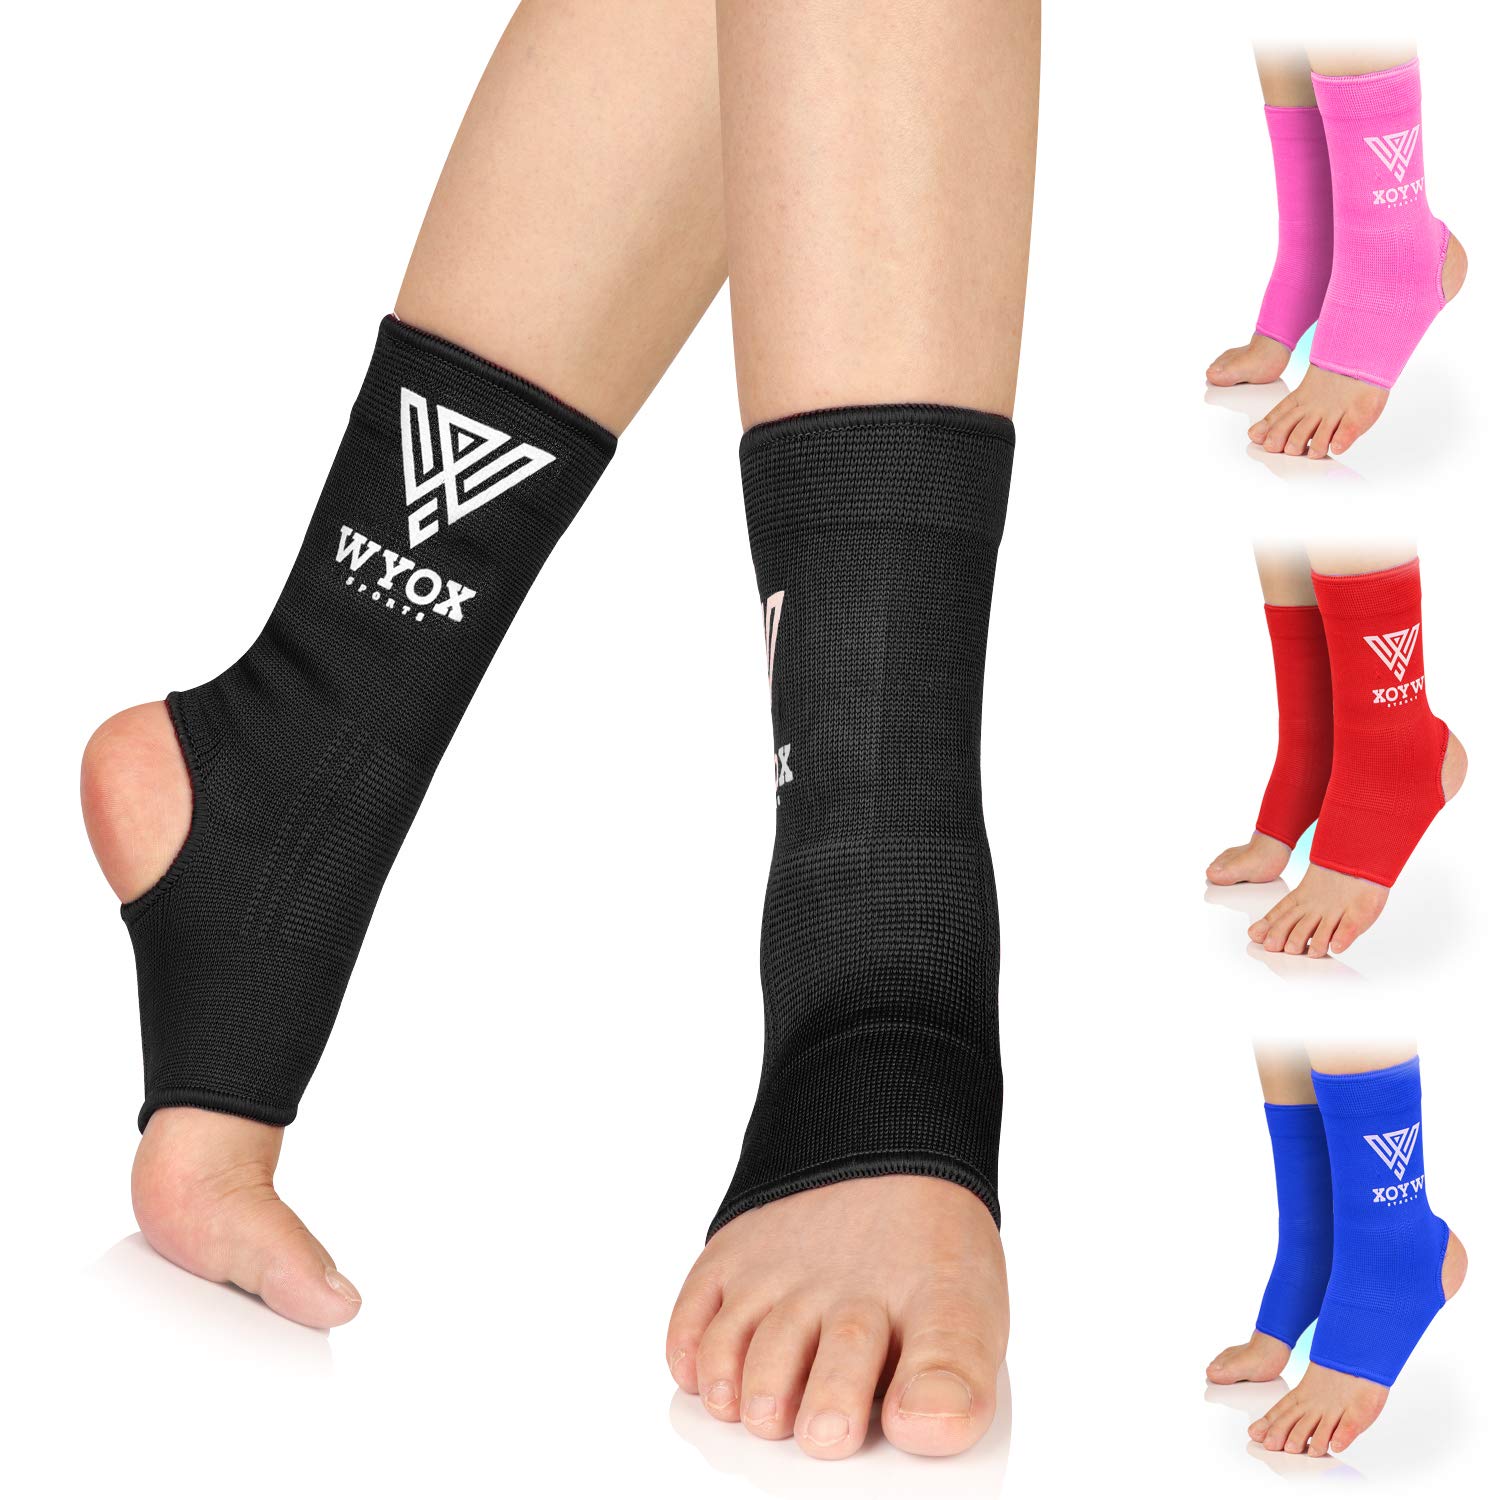 Muay Thai Anklets Men Women Kids Ankle Support Kickboxing Socks Sports  Braces Foot Leg Protector for Gym Kick Boxing Accessories